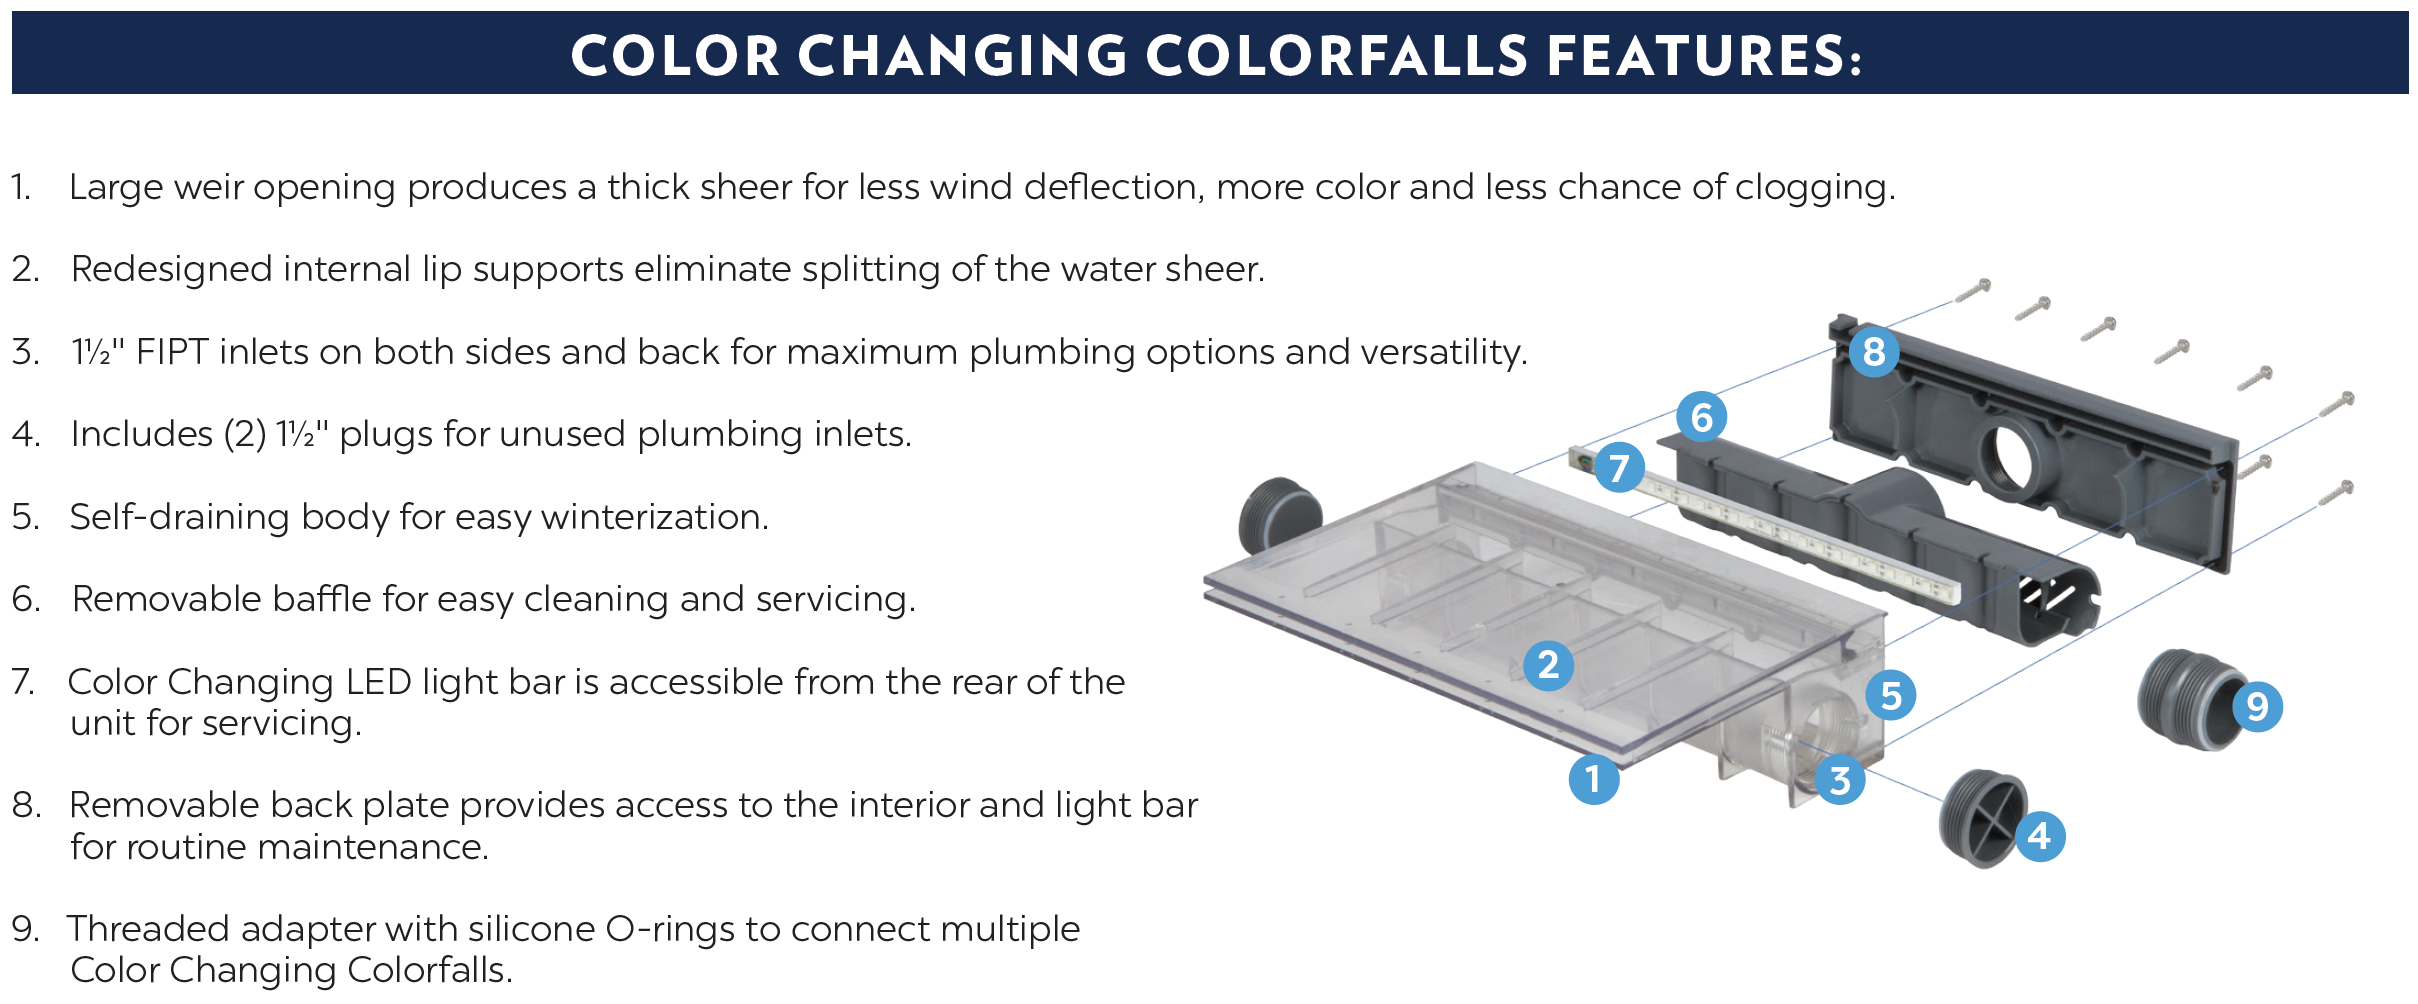 Color Changing Colorfalls Features